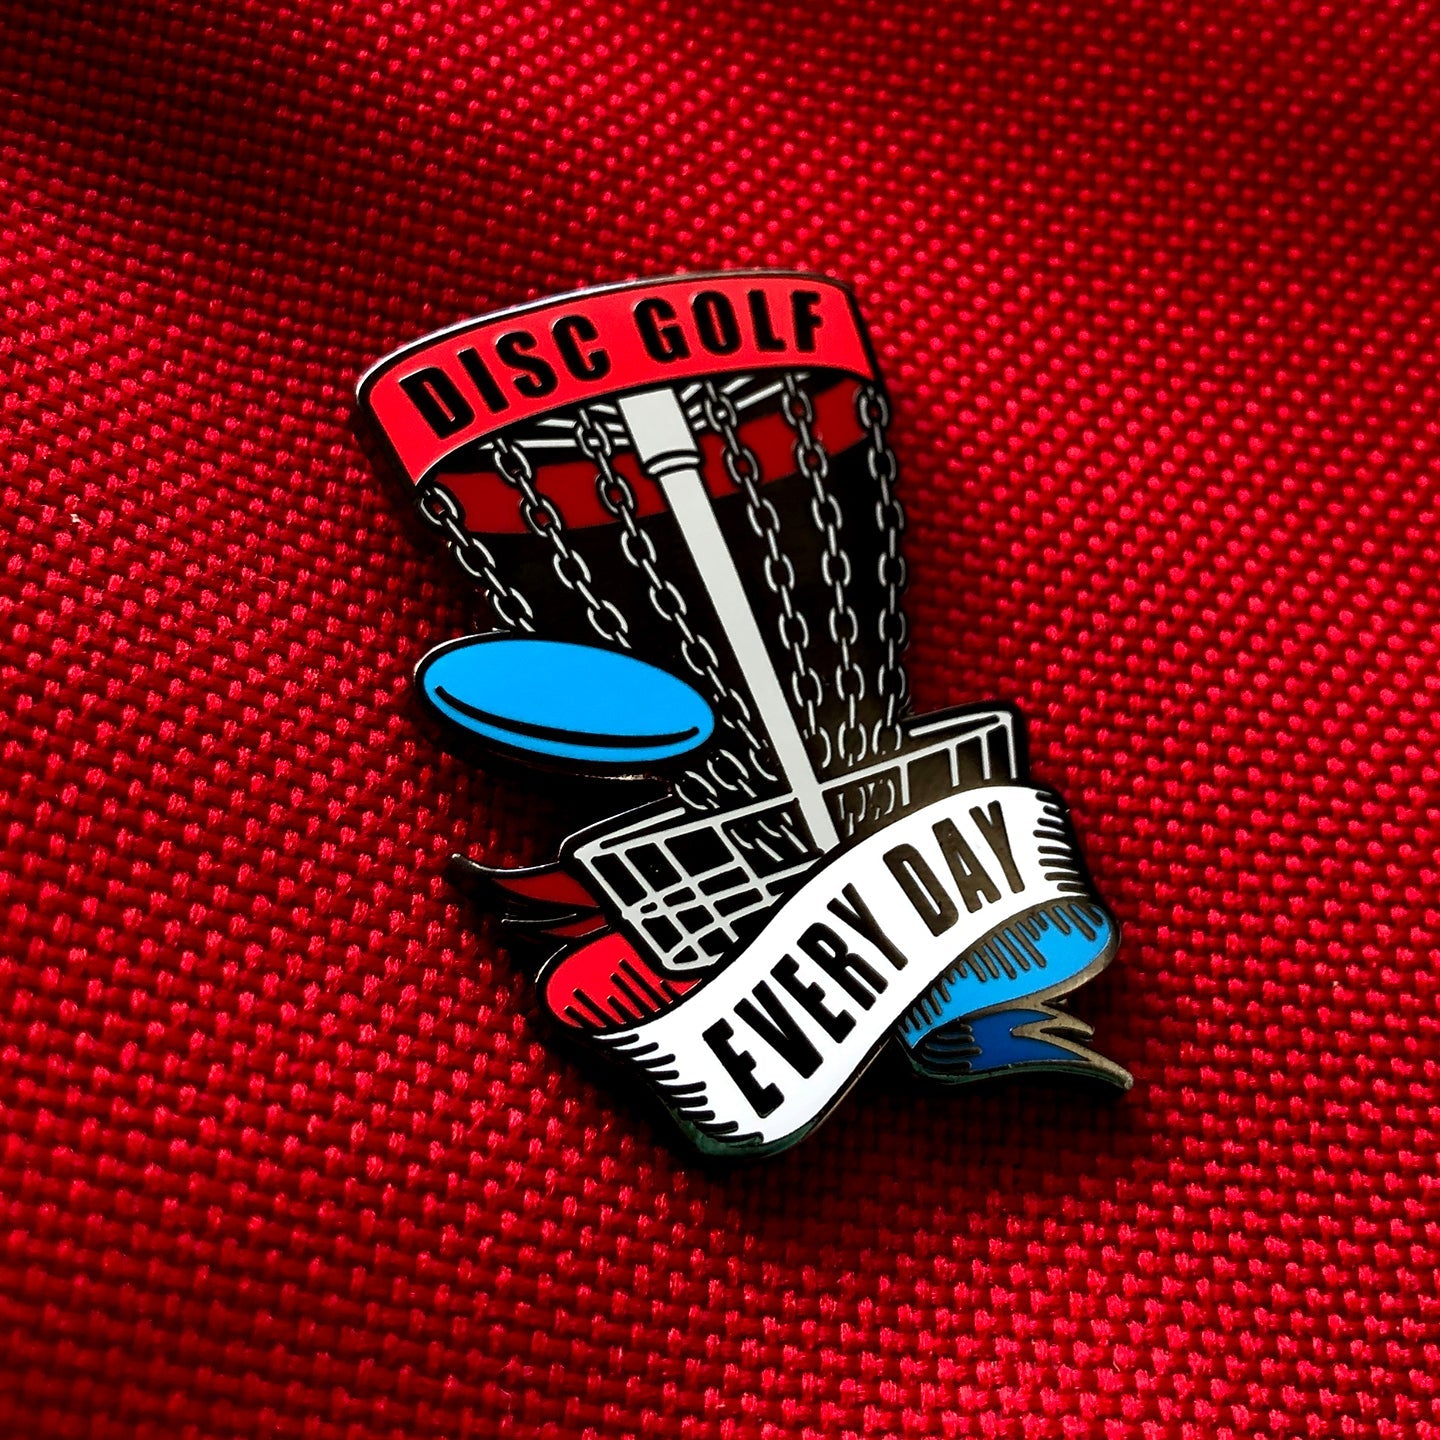 Disc Golf Every Day Basket Pin - RED, WHITE, BLUE